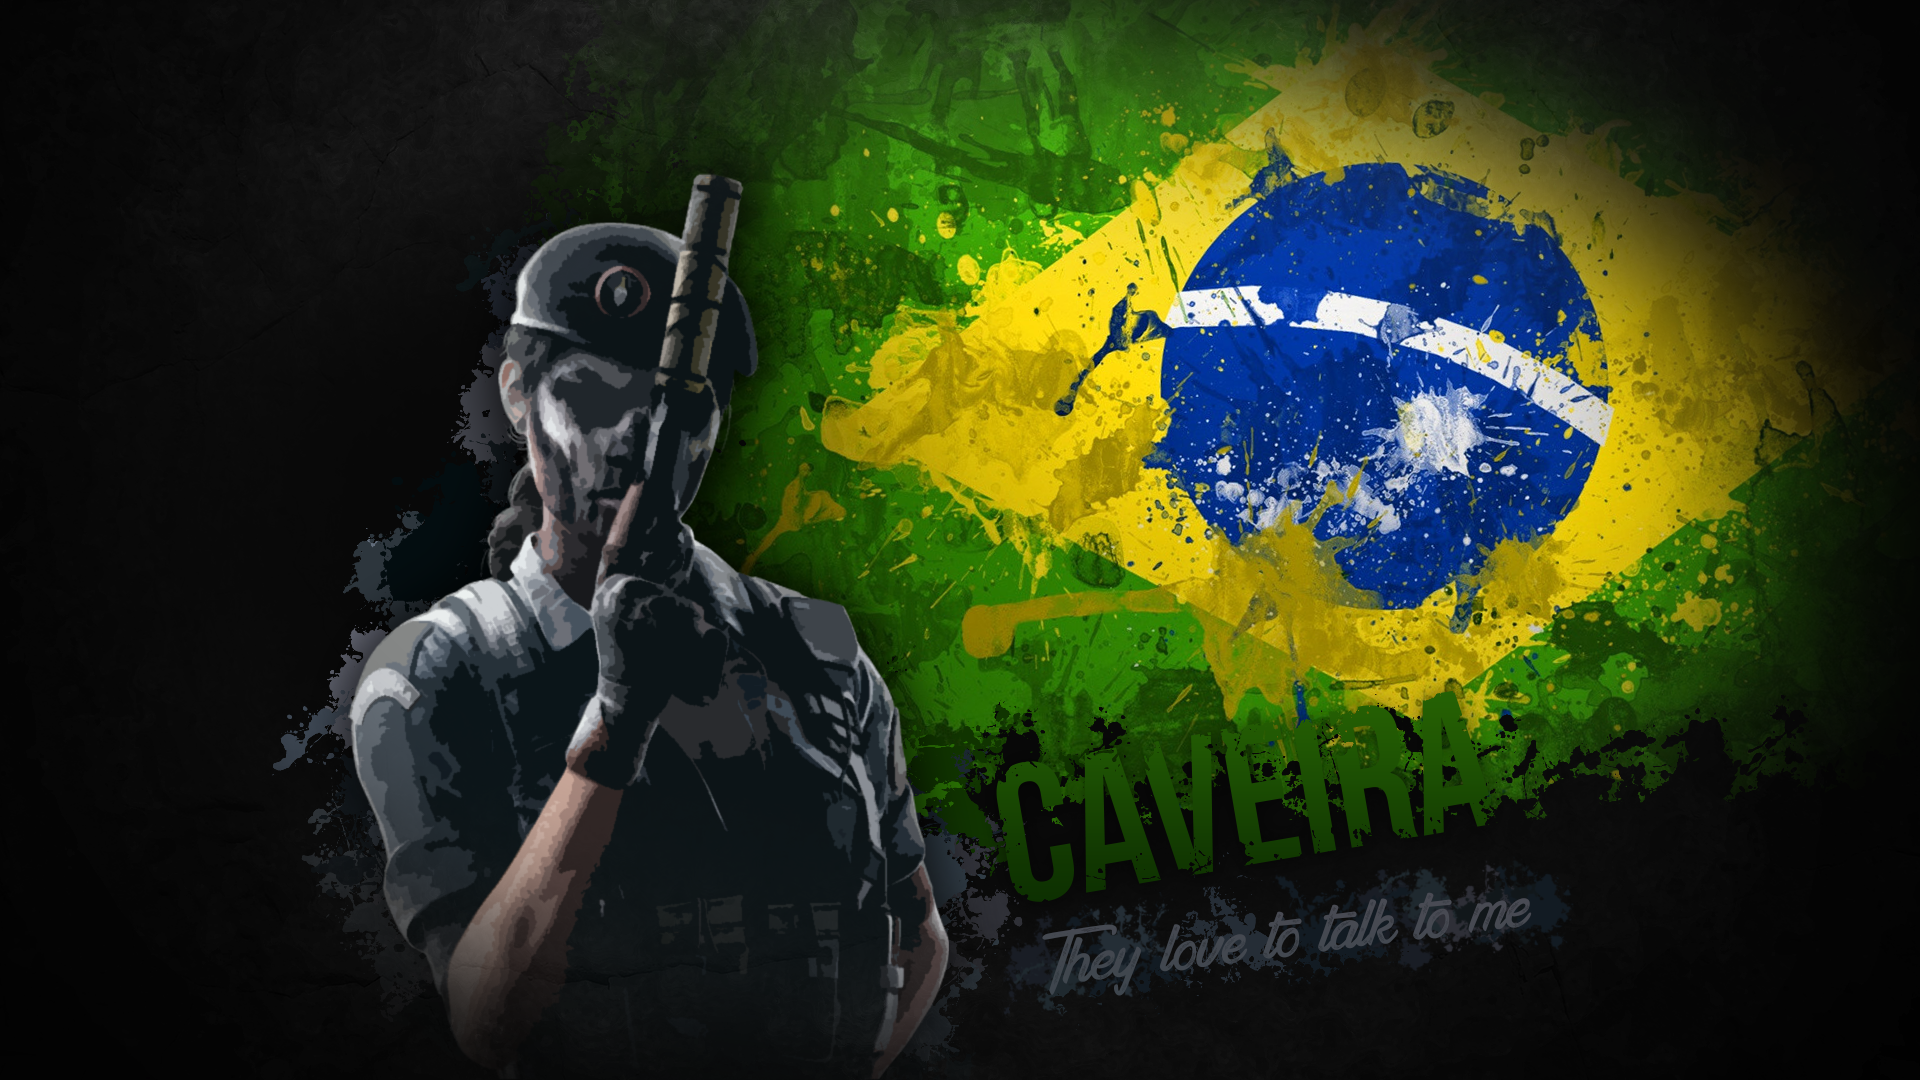 Couldn T Find Any Good Caveira Wallpaper So I Made One Myself